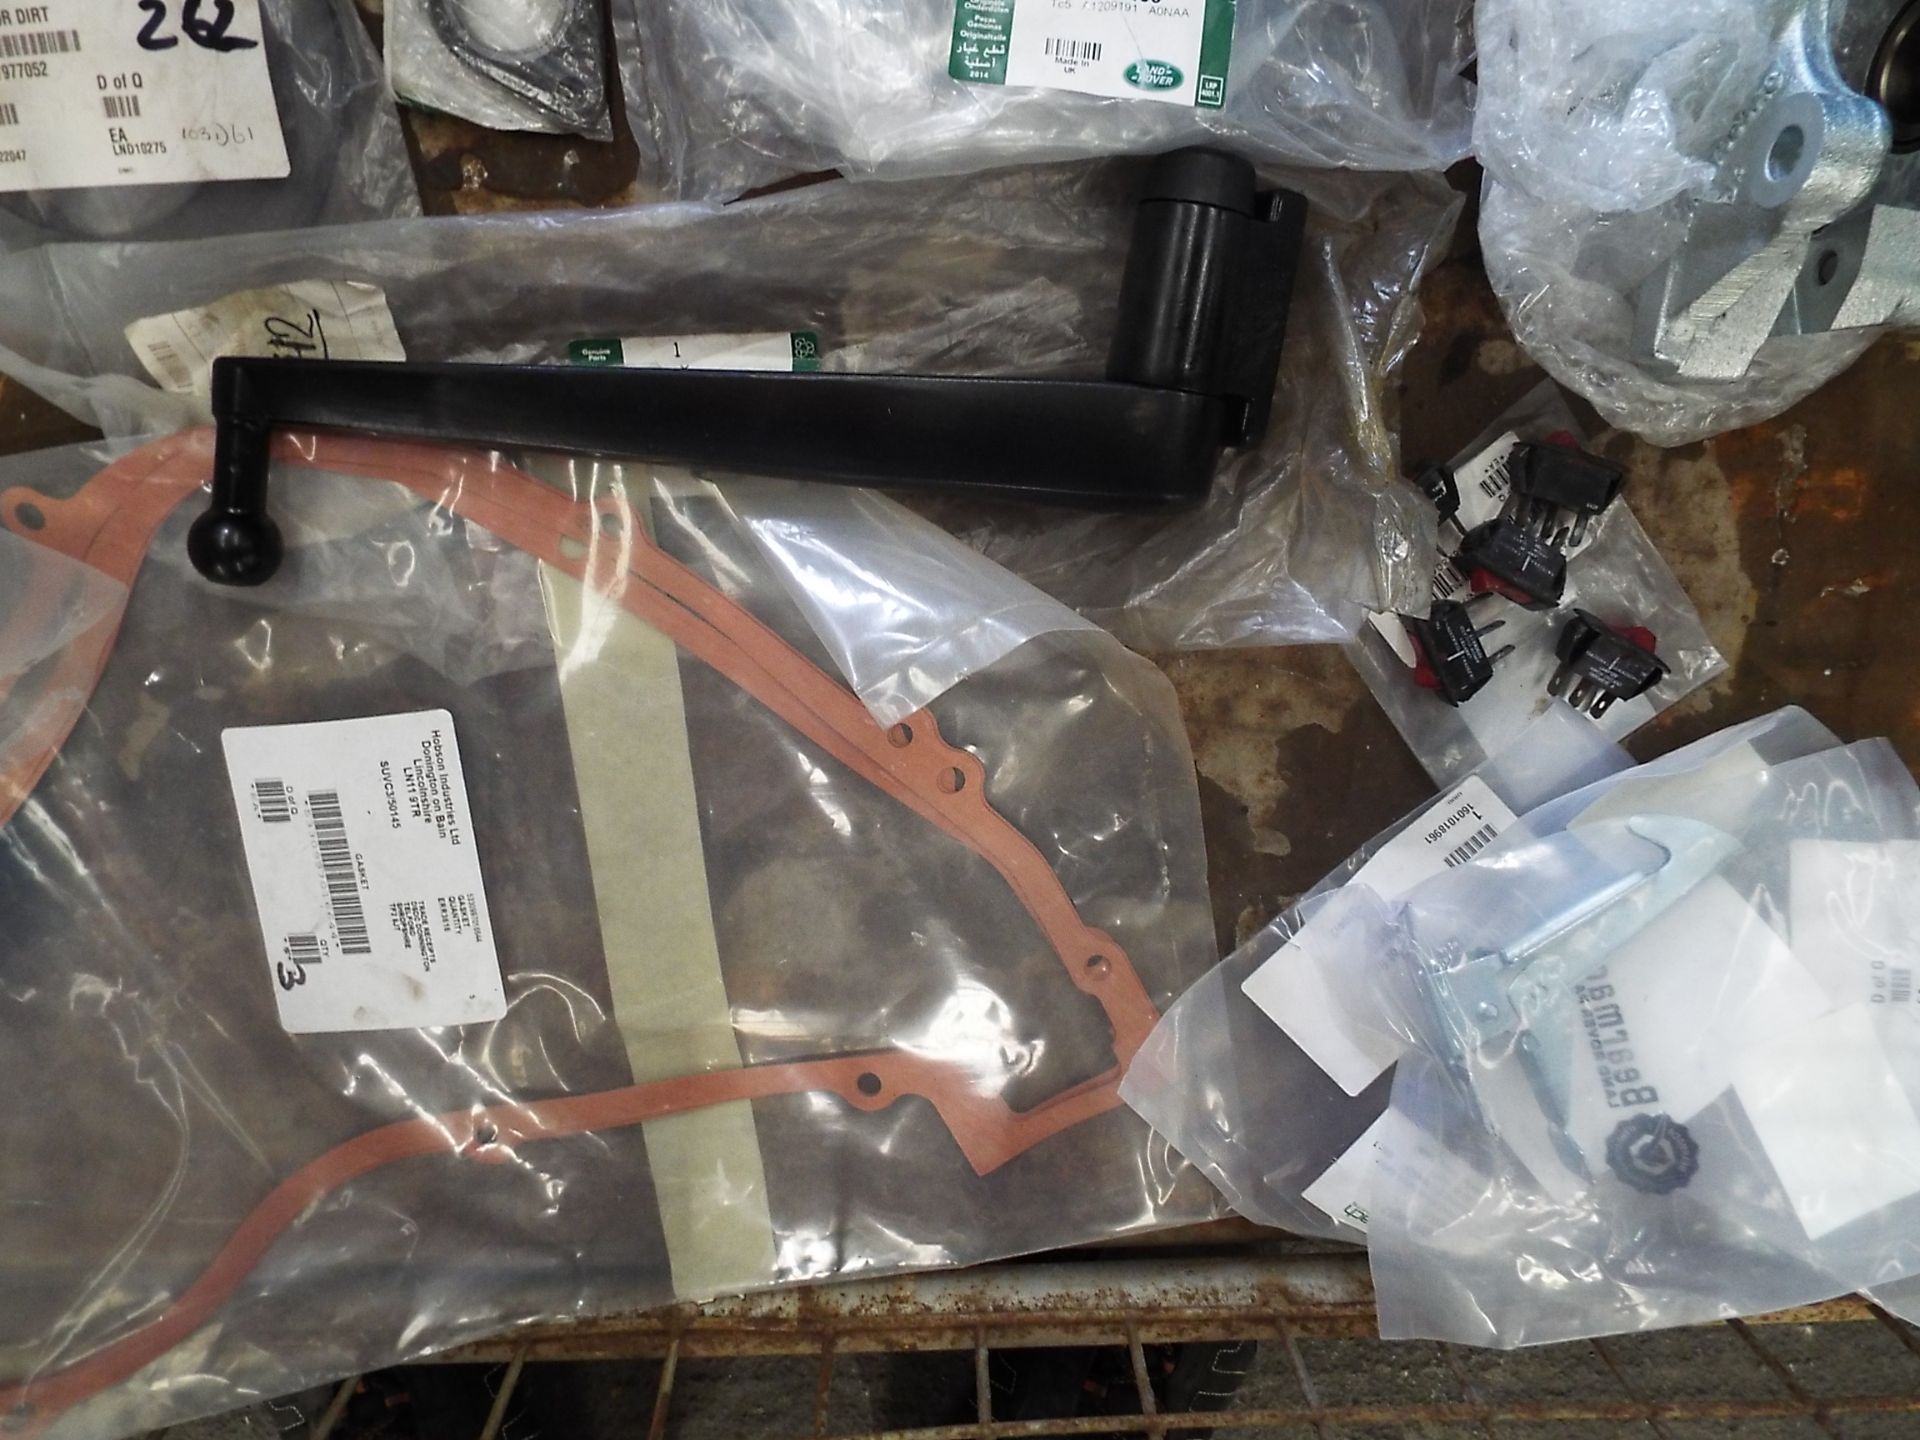 Mixed Stillage of Land Rover Wolf Parts inc Lenses, Tensioners, Alternator, Air Cleaners etc - Image 8 of 10